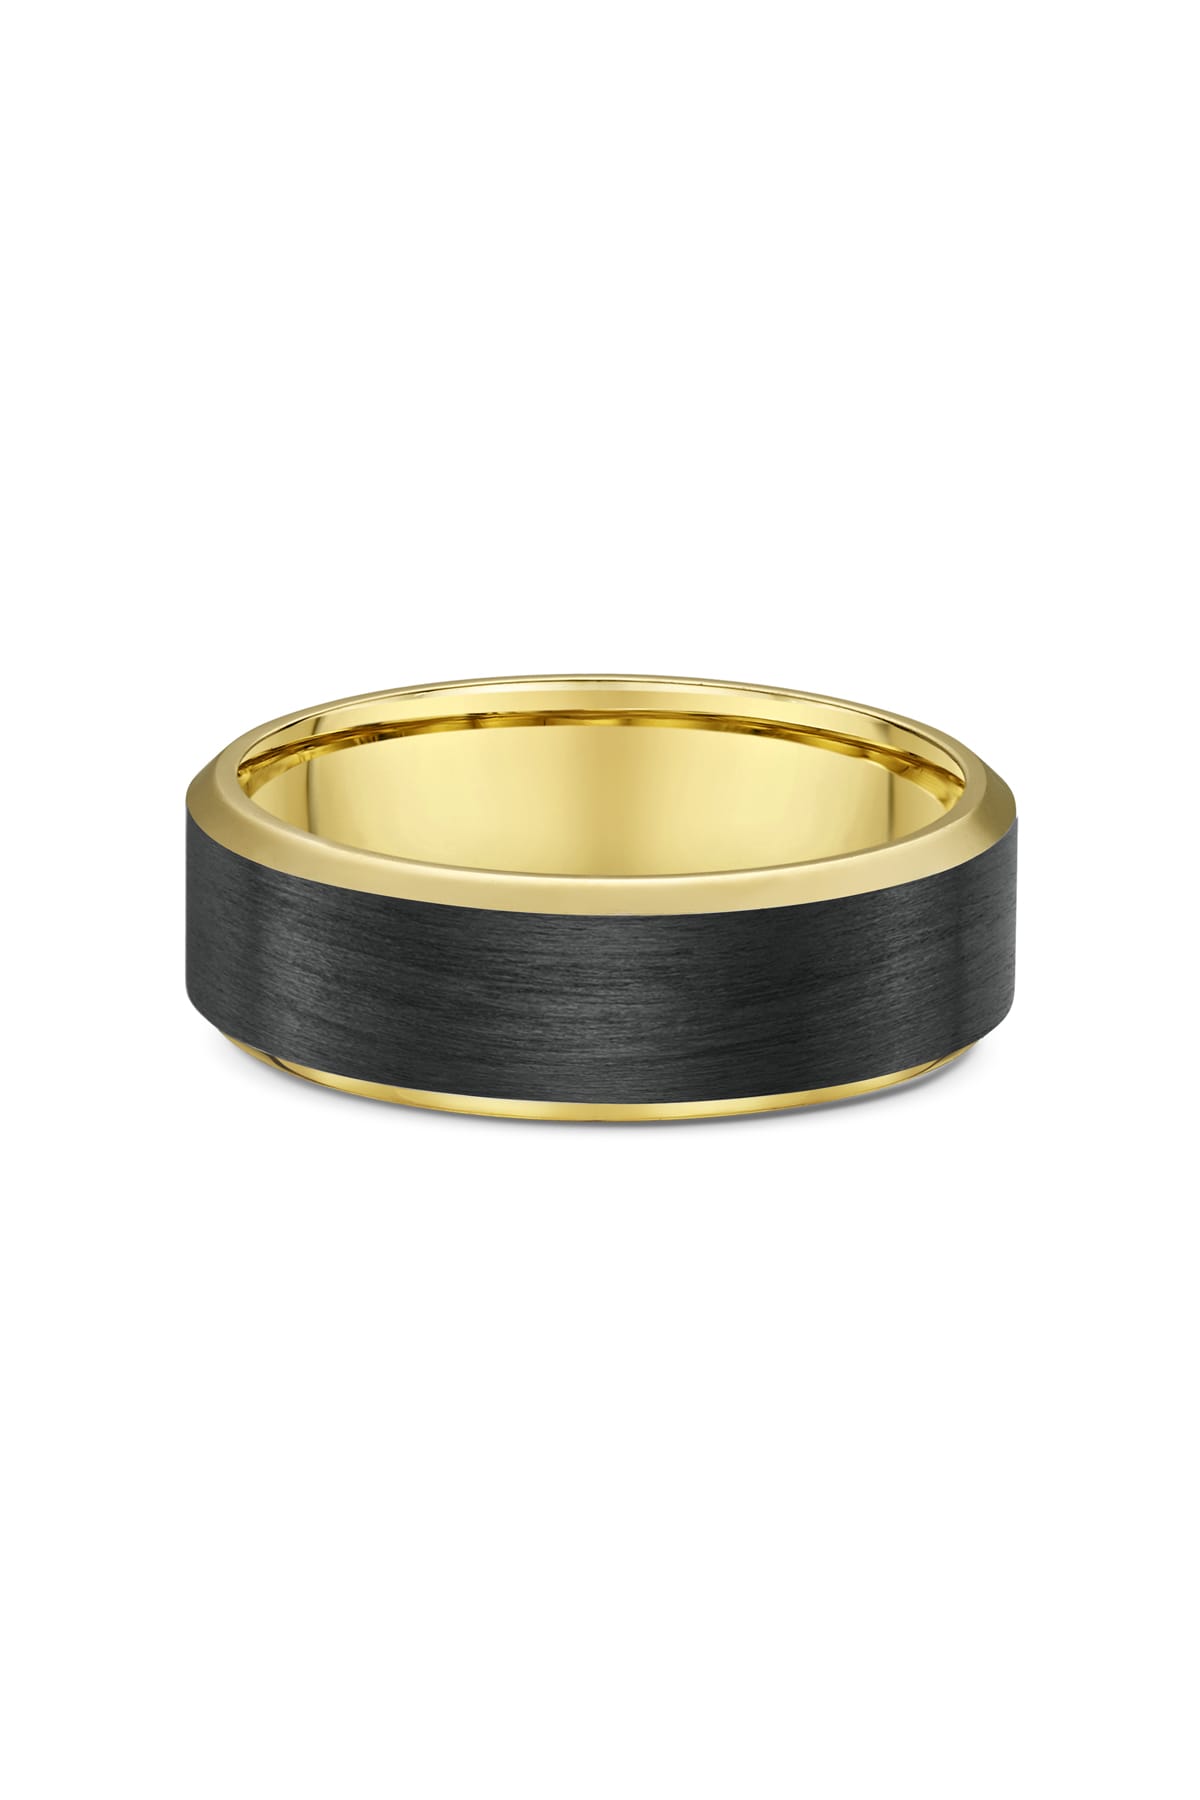 Men's Wedding Ring in yellow gold 592B00 available at LeGassick Diamonds and Jewellery Gold Coast, Australia.